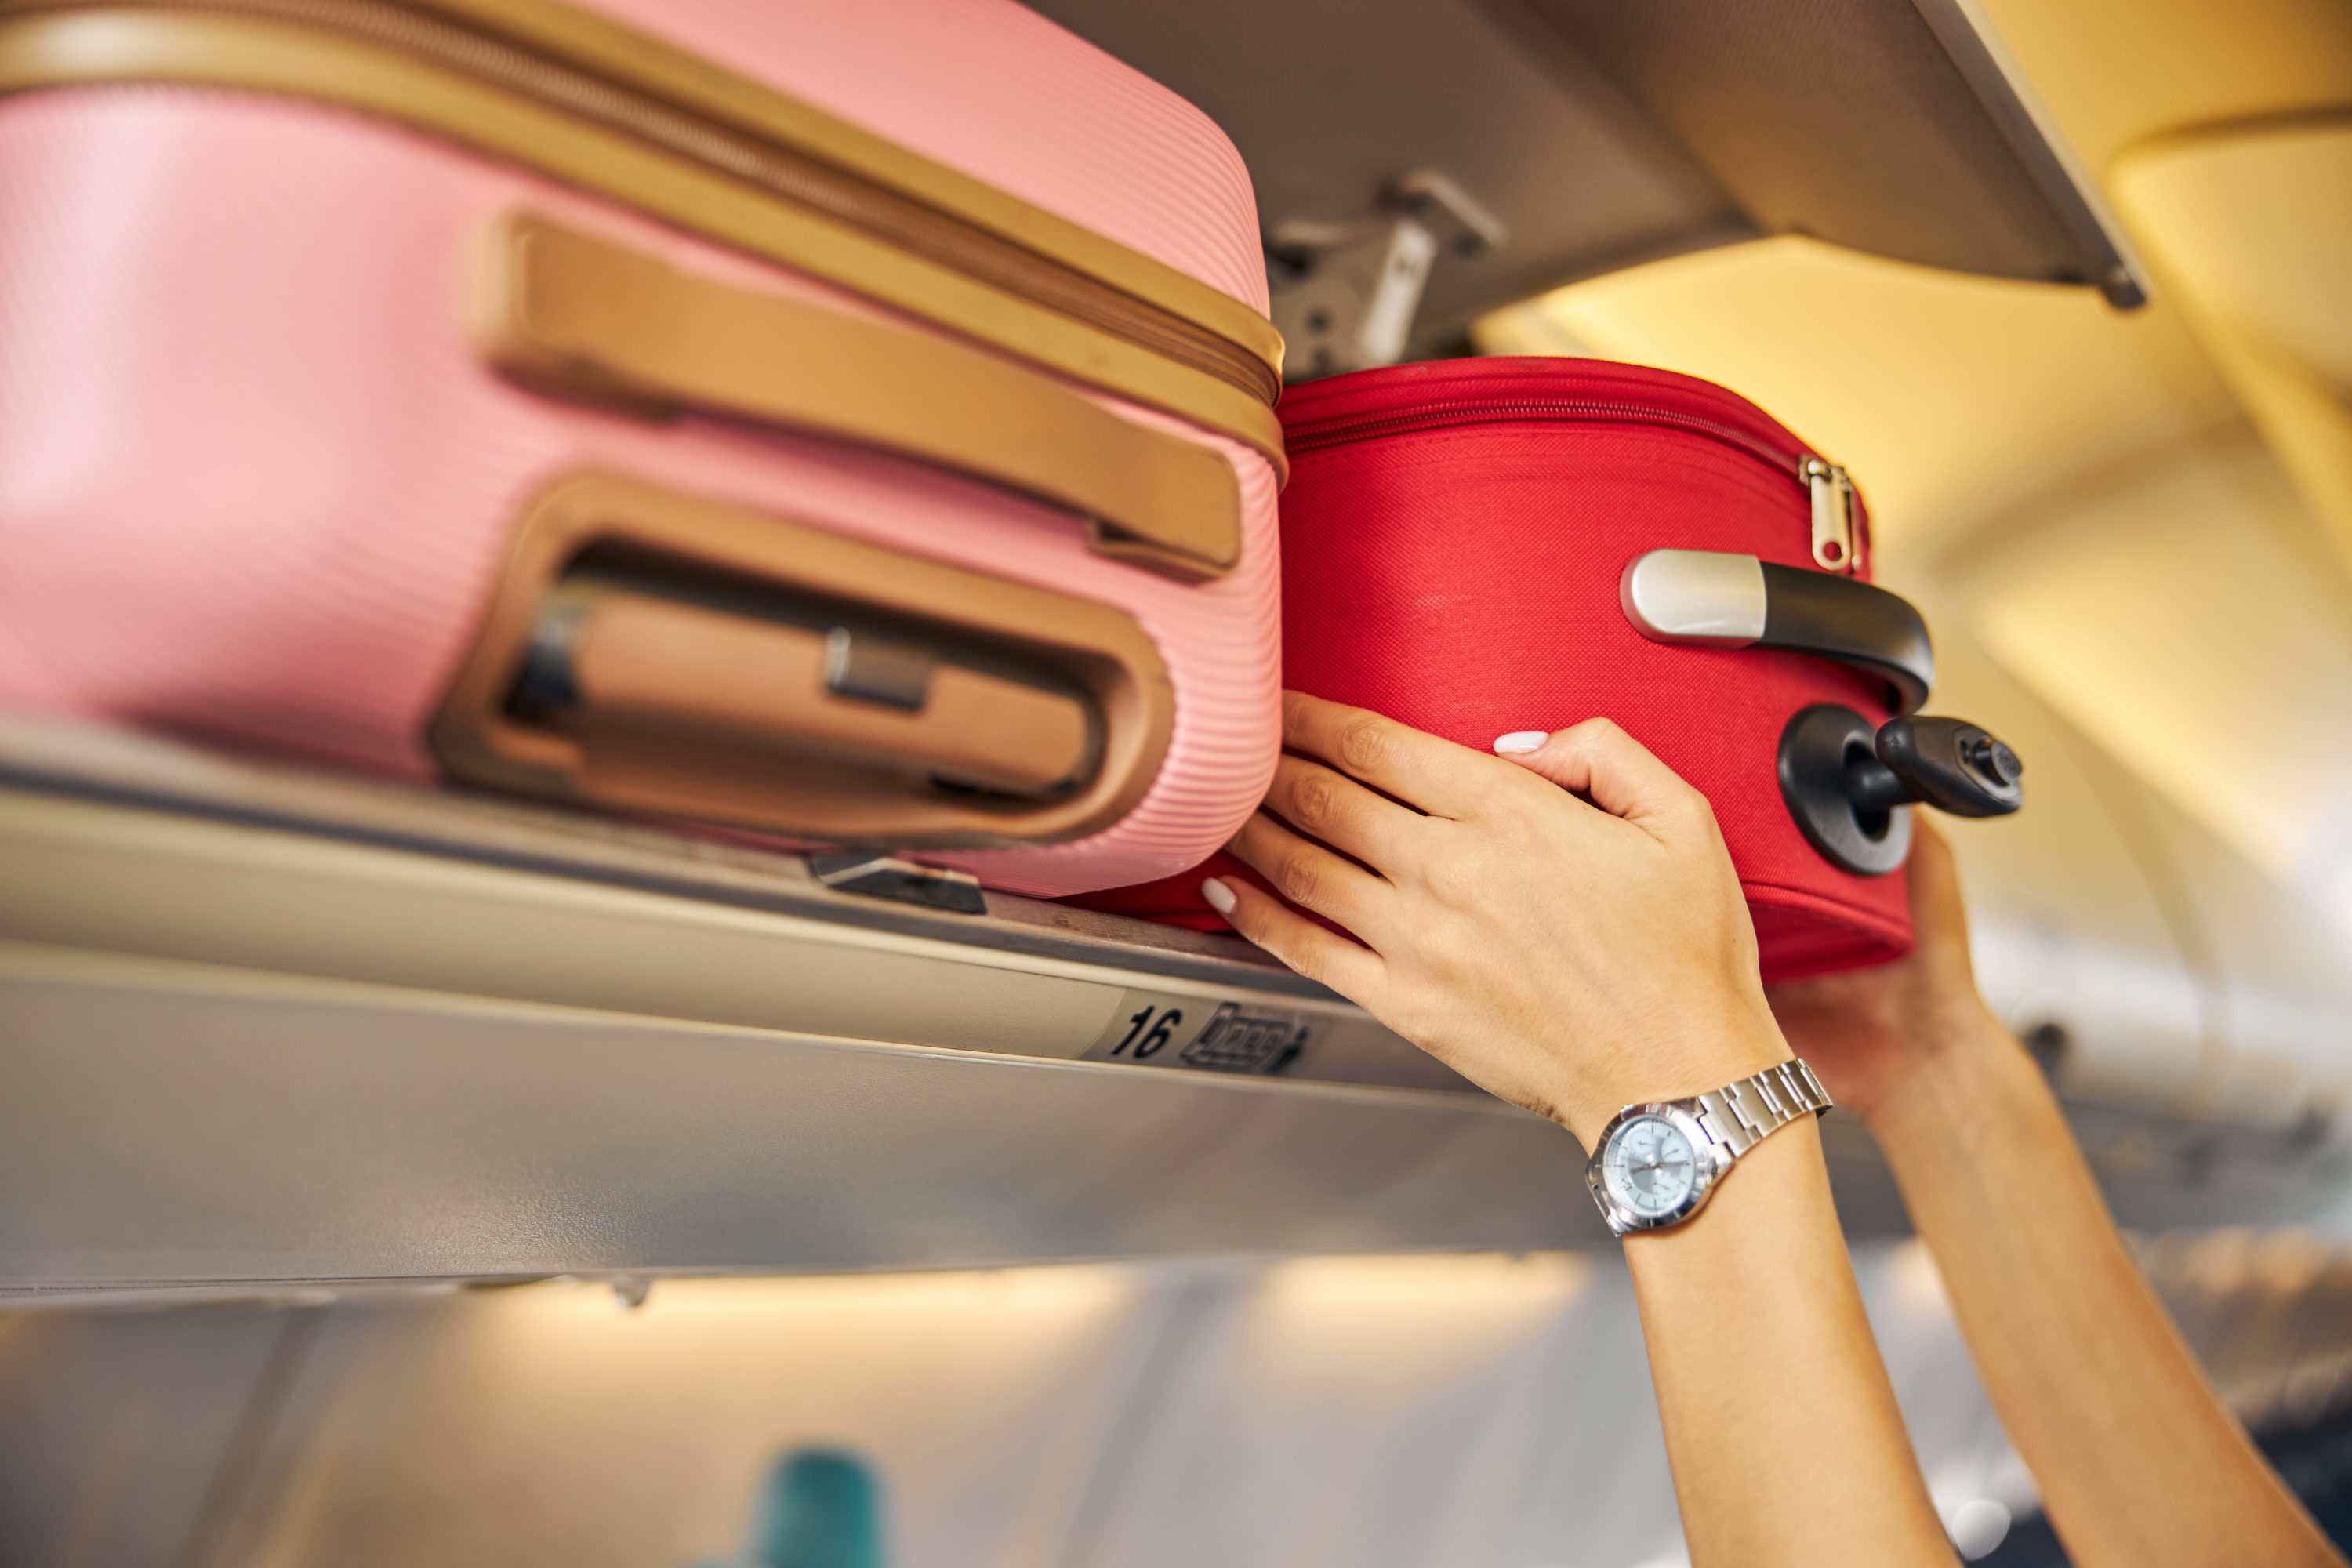 Hands laying down a carry on baggage on an upper shelf